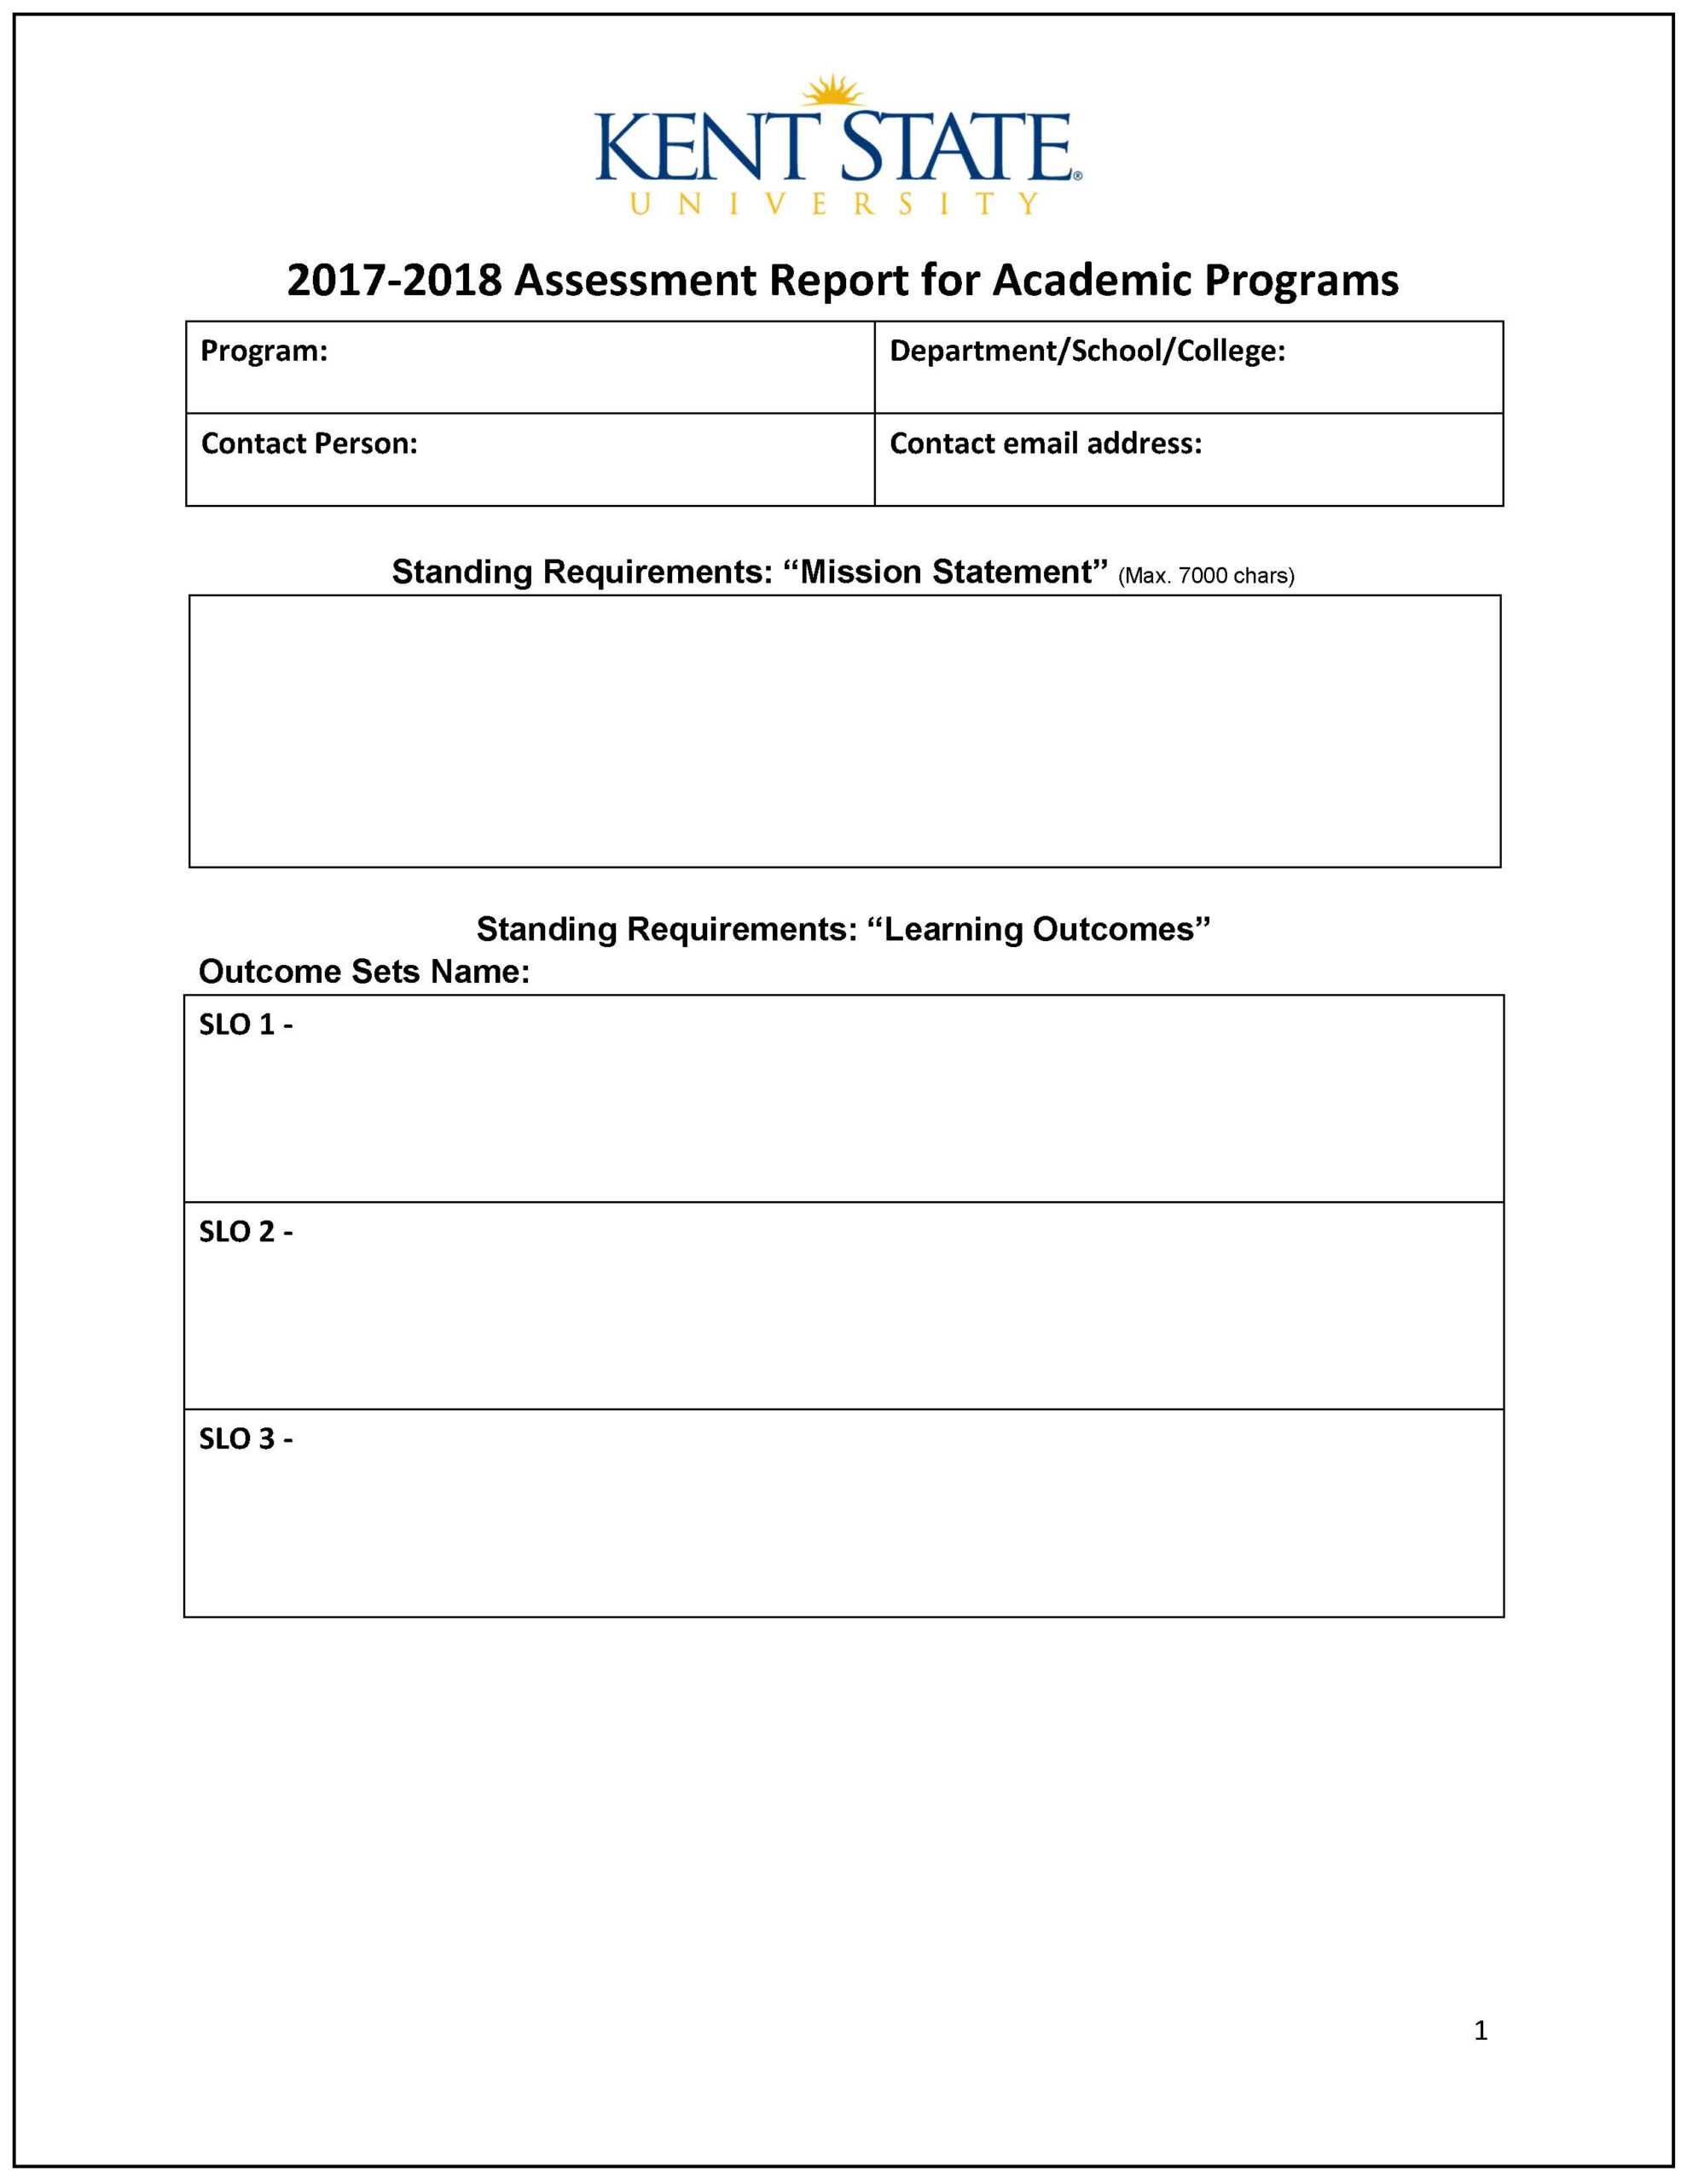 Assessment Report – Word Template | Accreditation Within Word Document Report Templates